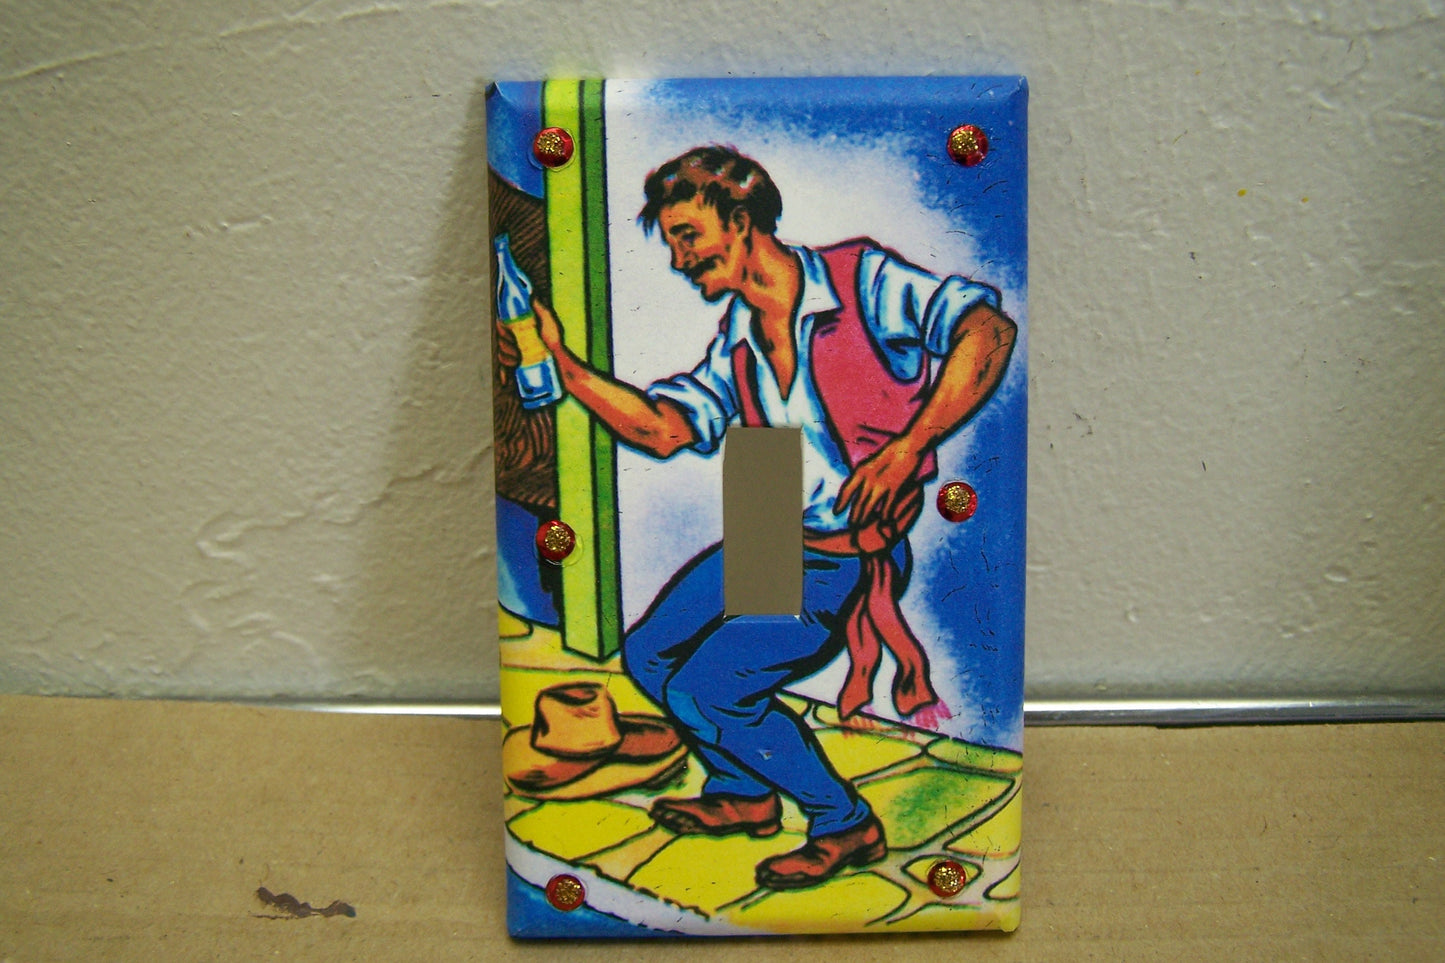 Switchplate - El Borracho Loteria Image with Sequins